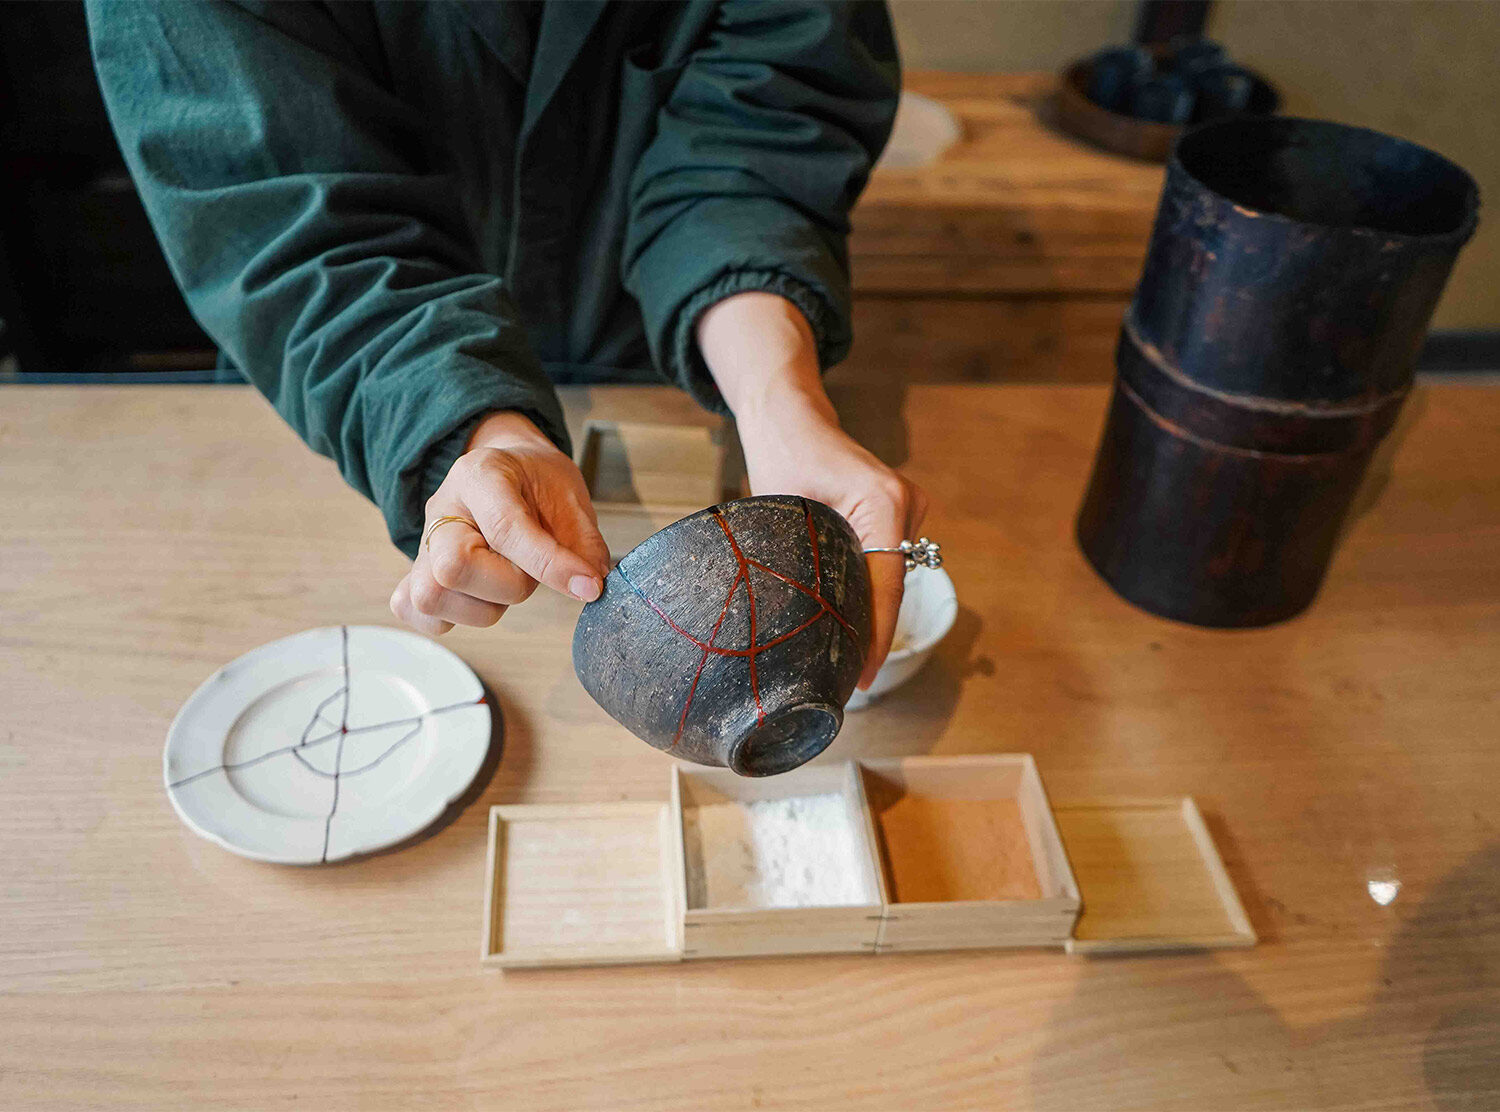 Maana Homes POJ Studio invited us to learn about the art of Kintsugi, a fascinating and unique practice of reverence and preservation